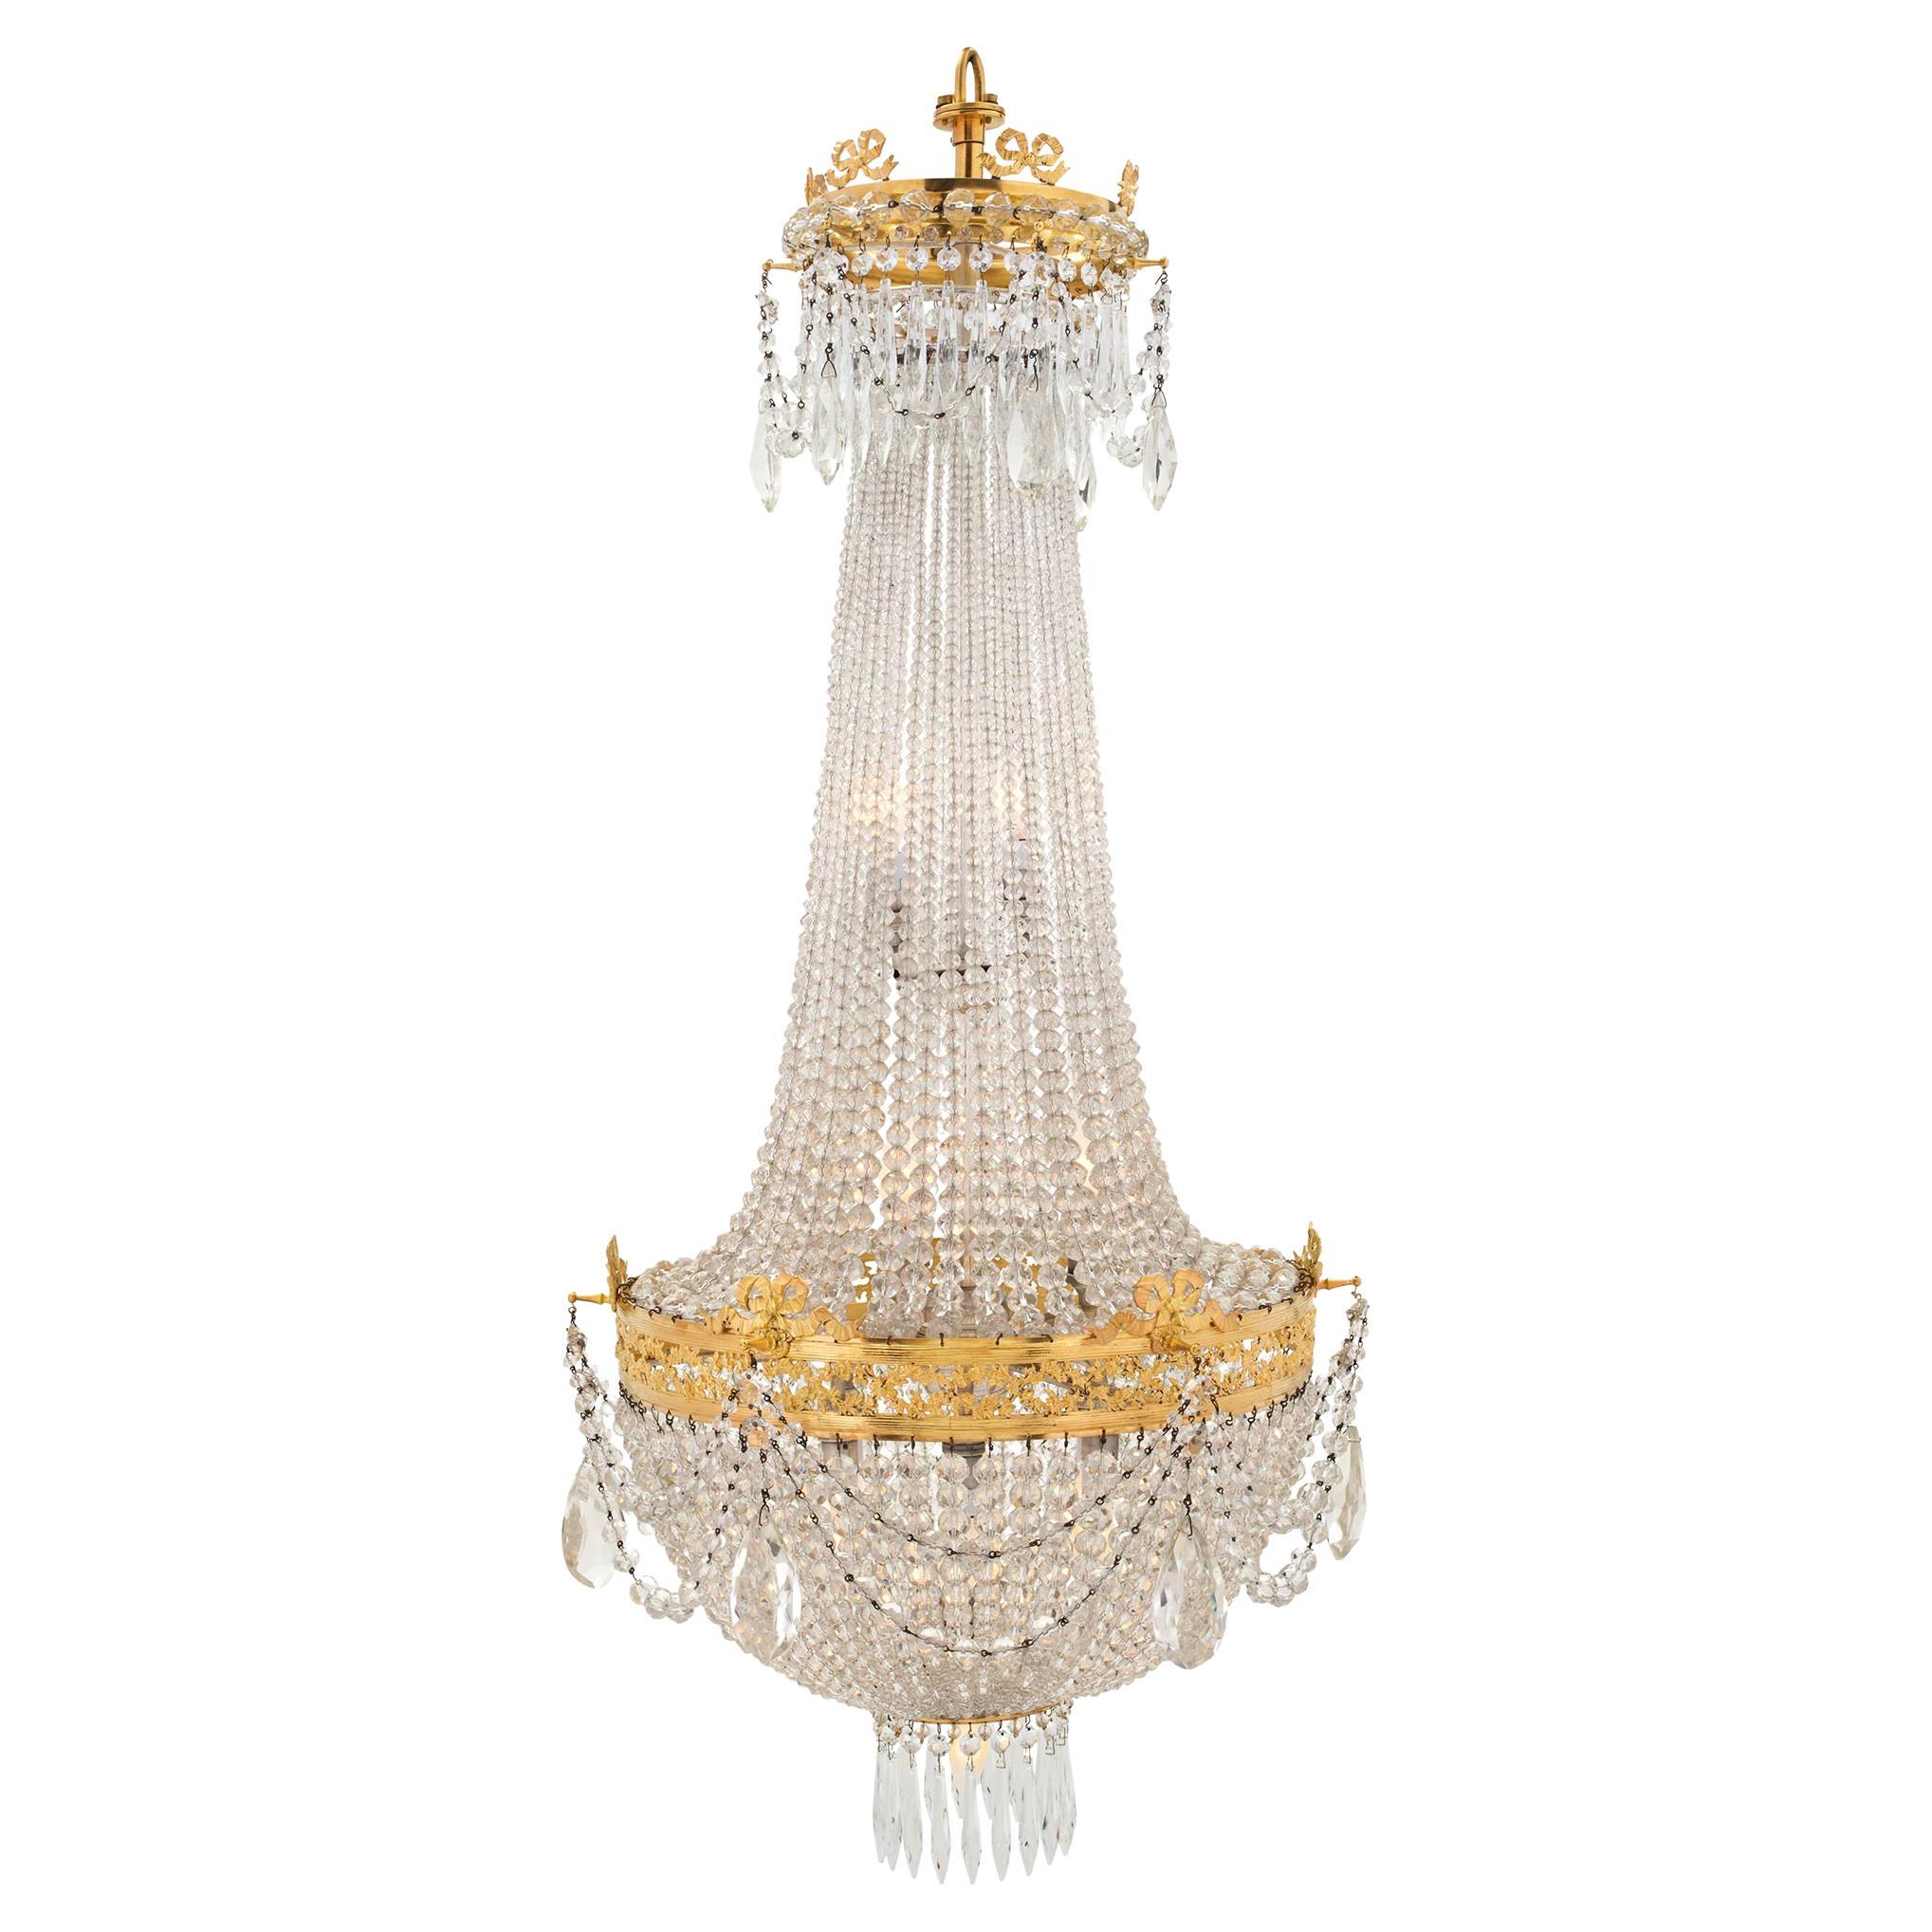 French 19th Century Louis XVI St. Crystal and Ormolu Chandelier